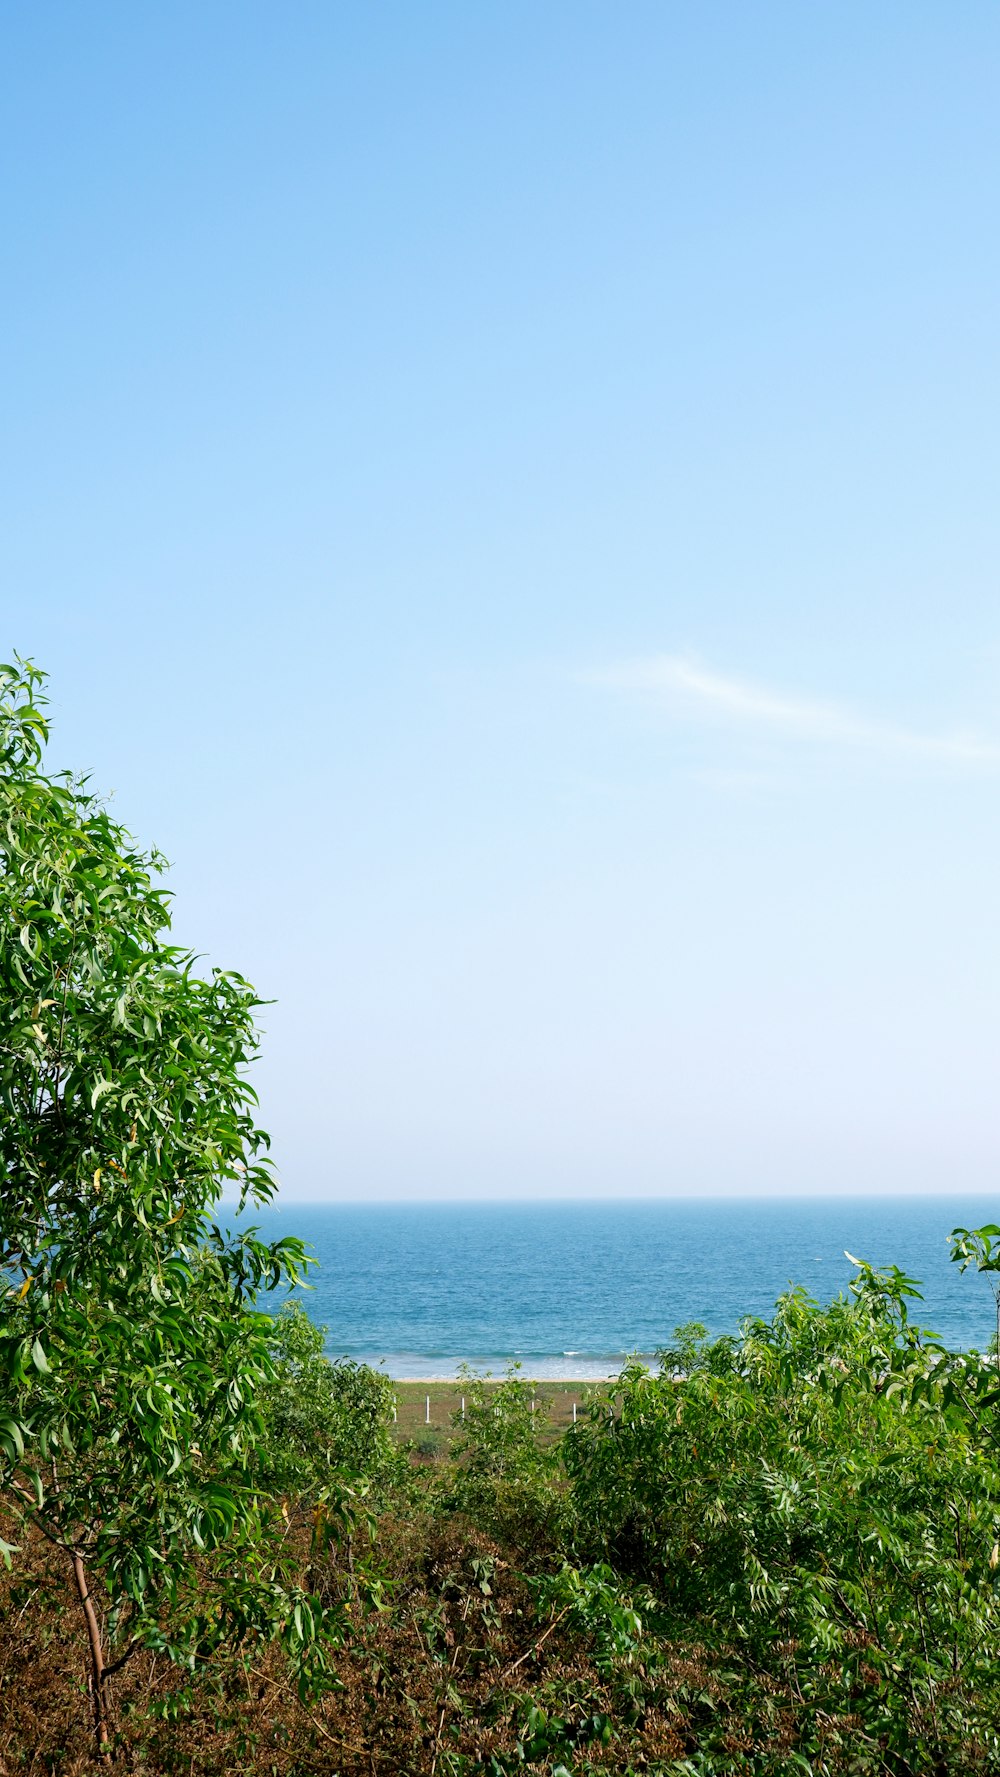 a view of the ocean from a wooded area